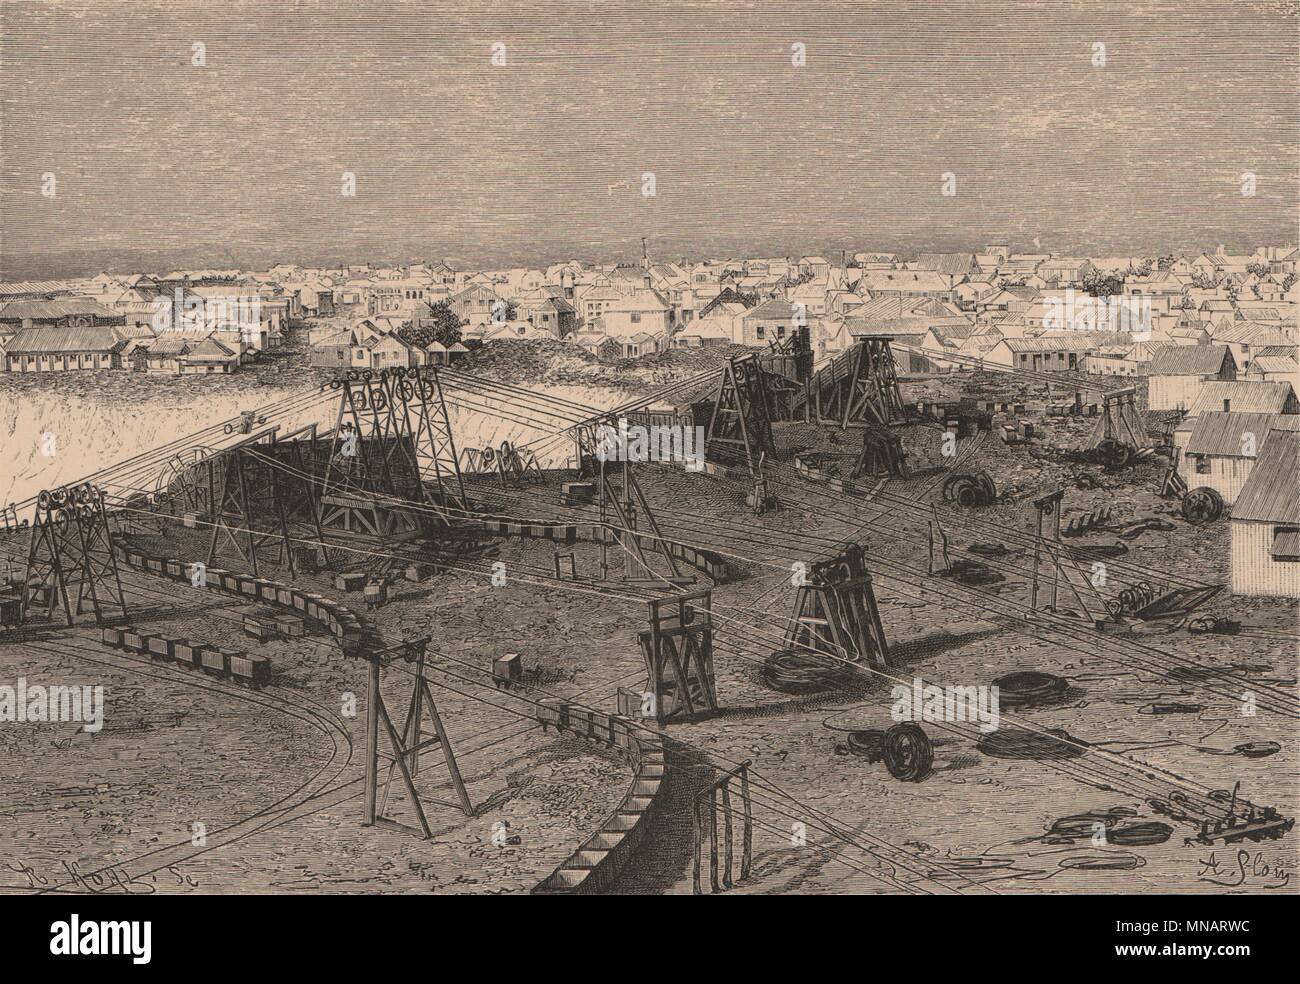 Kimberley and its Diamond Mine. South Africa. Cape Colony 1885 old print Stock Photo